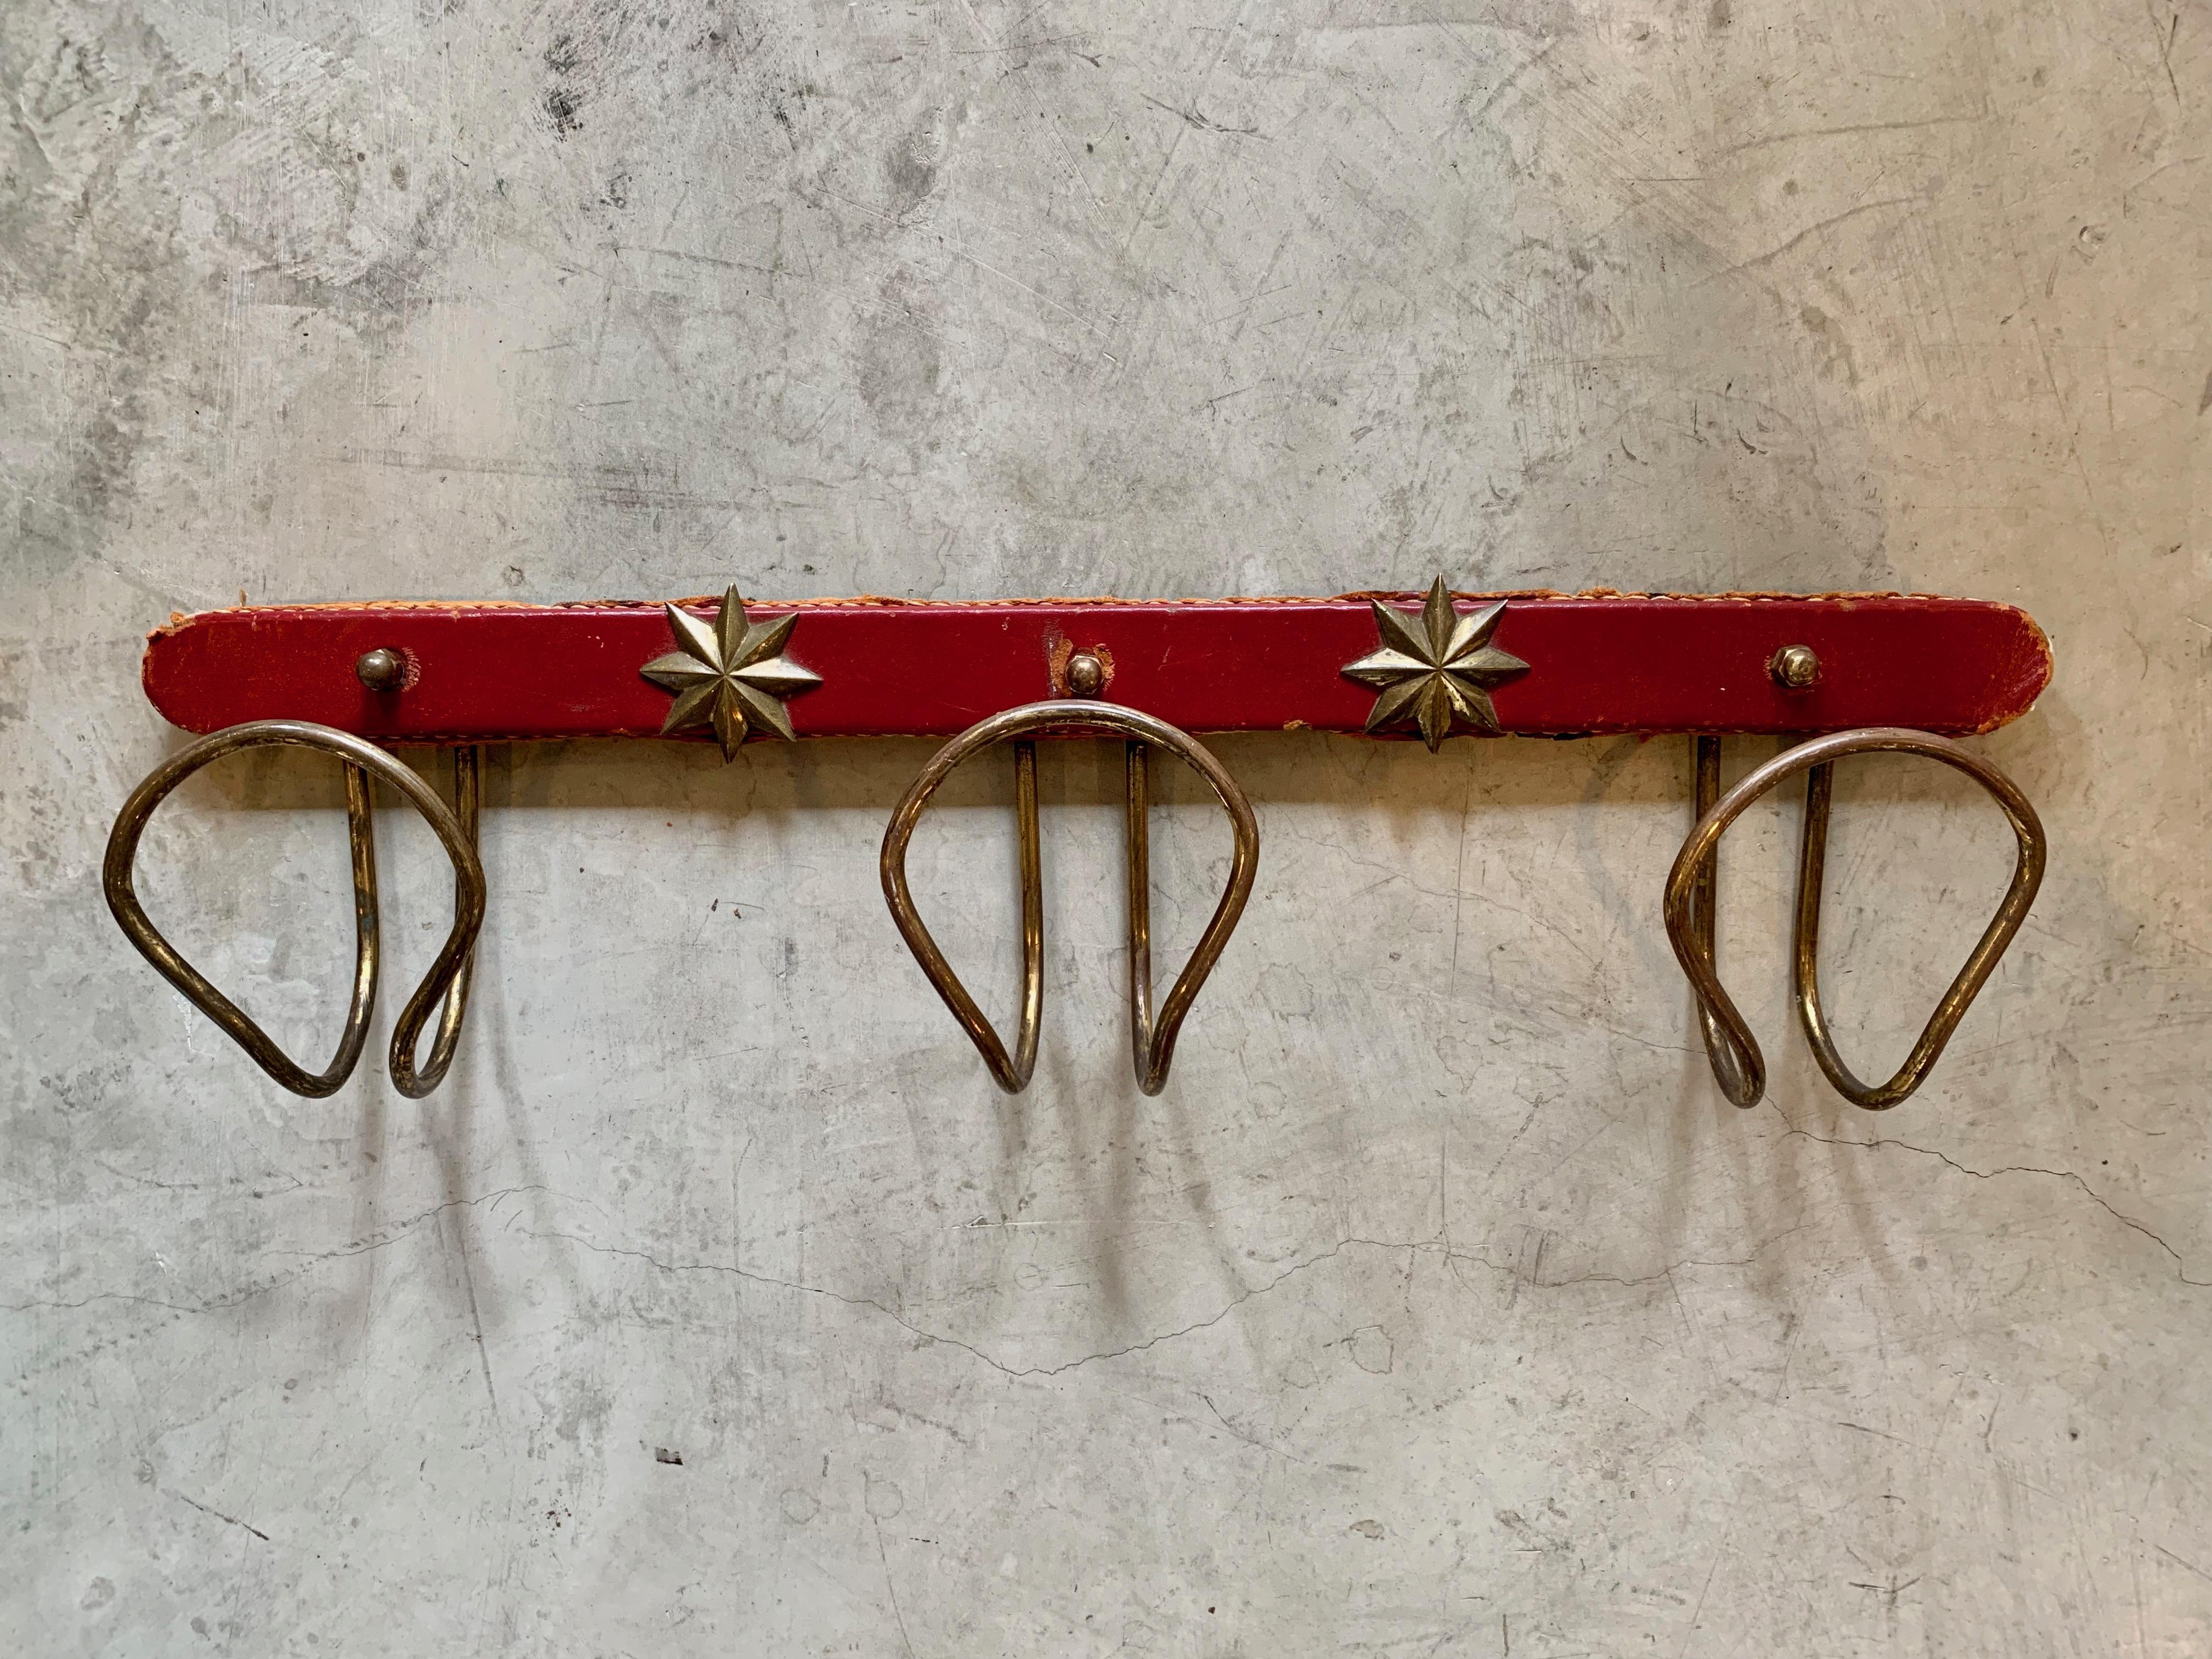 Classic coat rack by French designer Jacques Adnet. Three brass tongue shaped hooks extending from red leather bar with signature Adnet contrast stitching. Three brass nuts covering the wall mounting holes. 2 brass decorative stars. Leather in